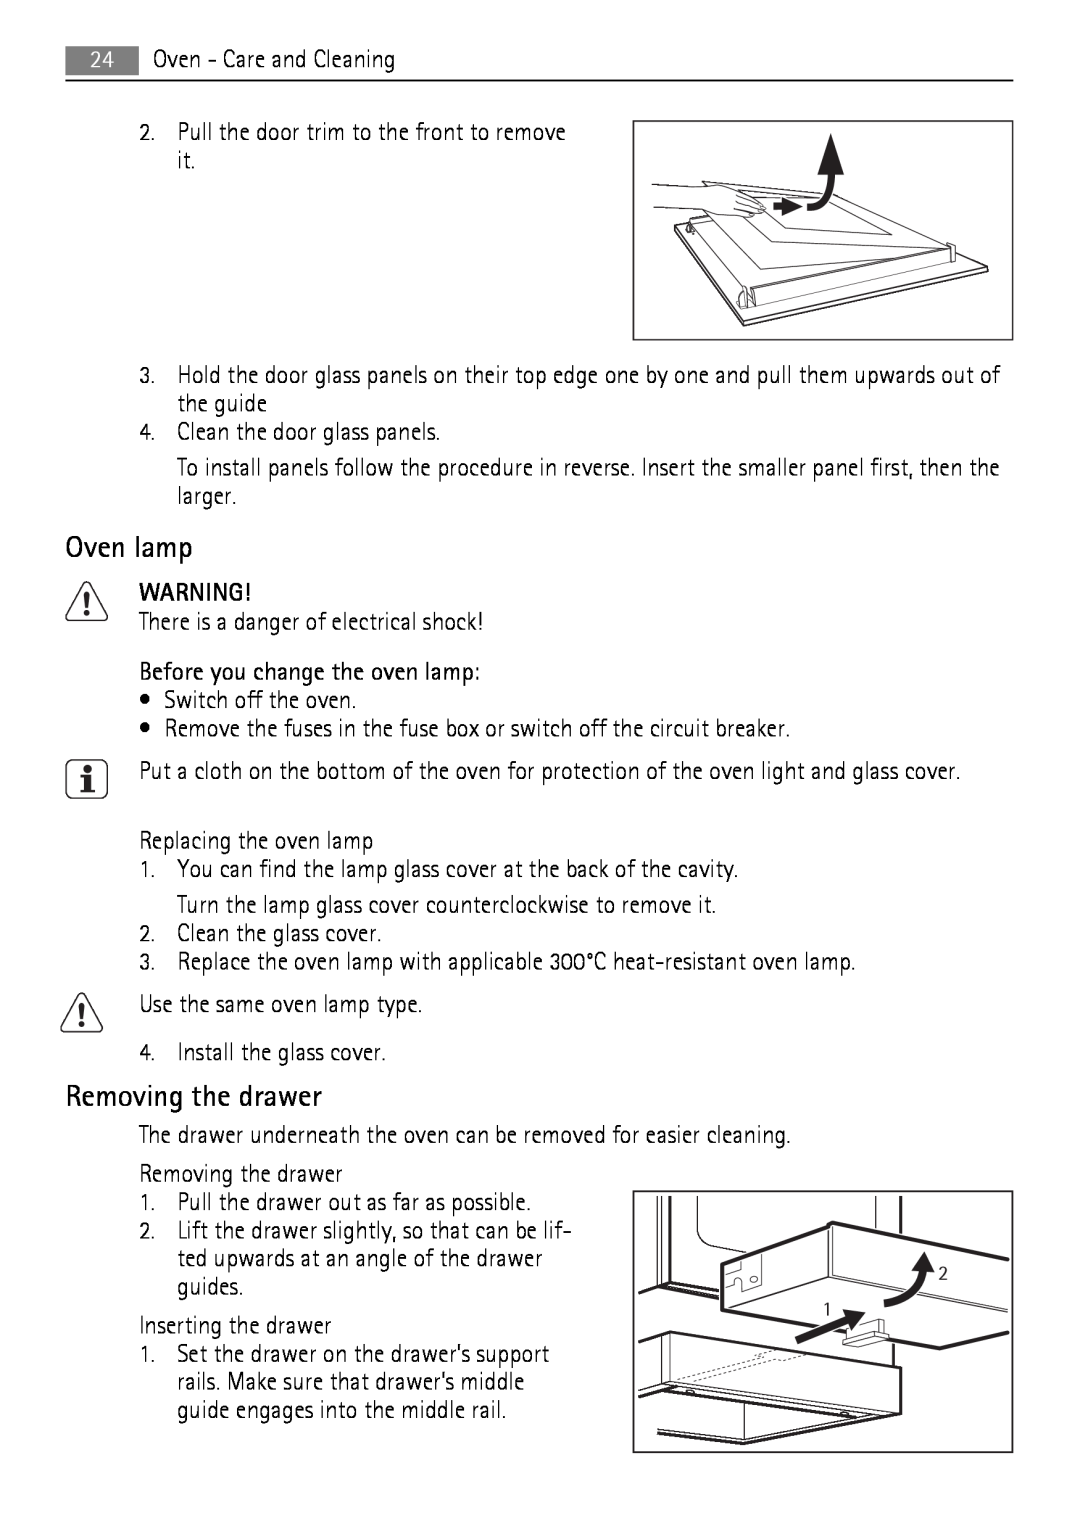 Electrolux 40036VI-WN user manual Oven lamp, Removing the drawer 